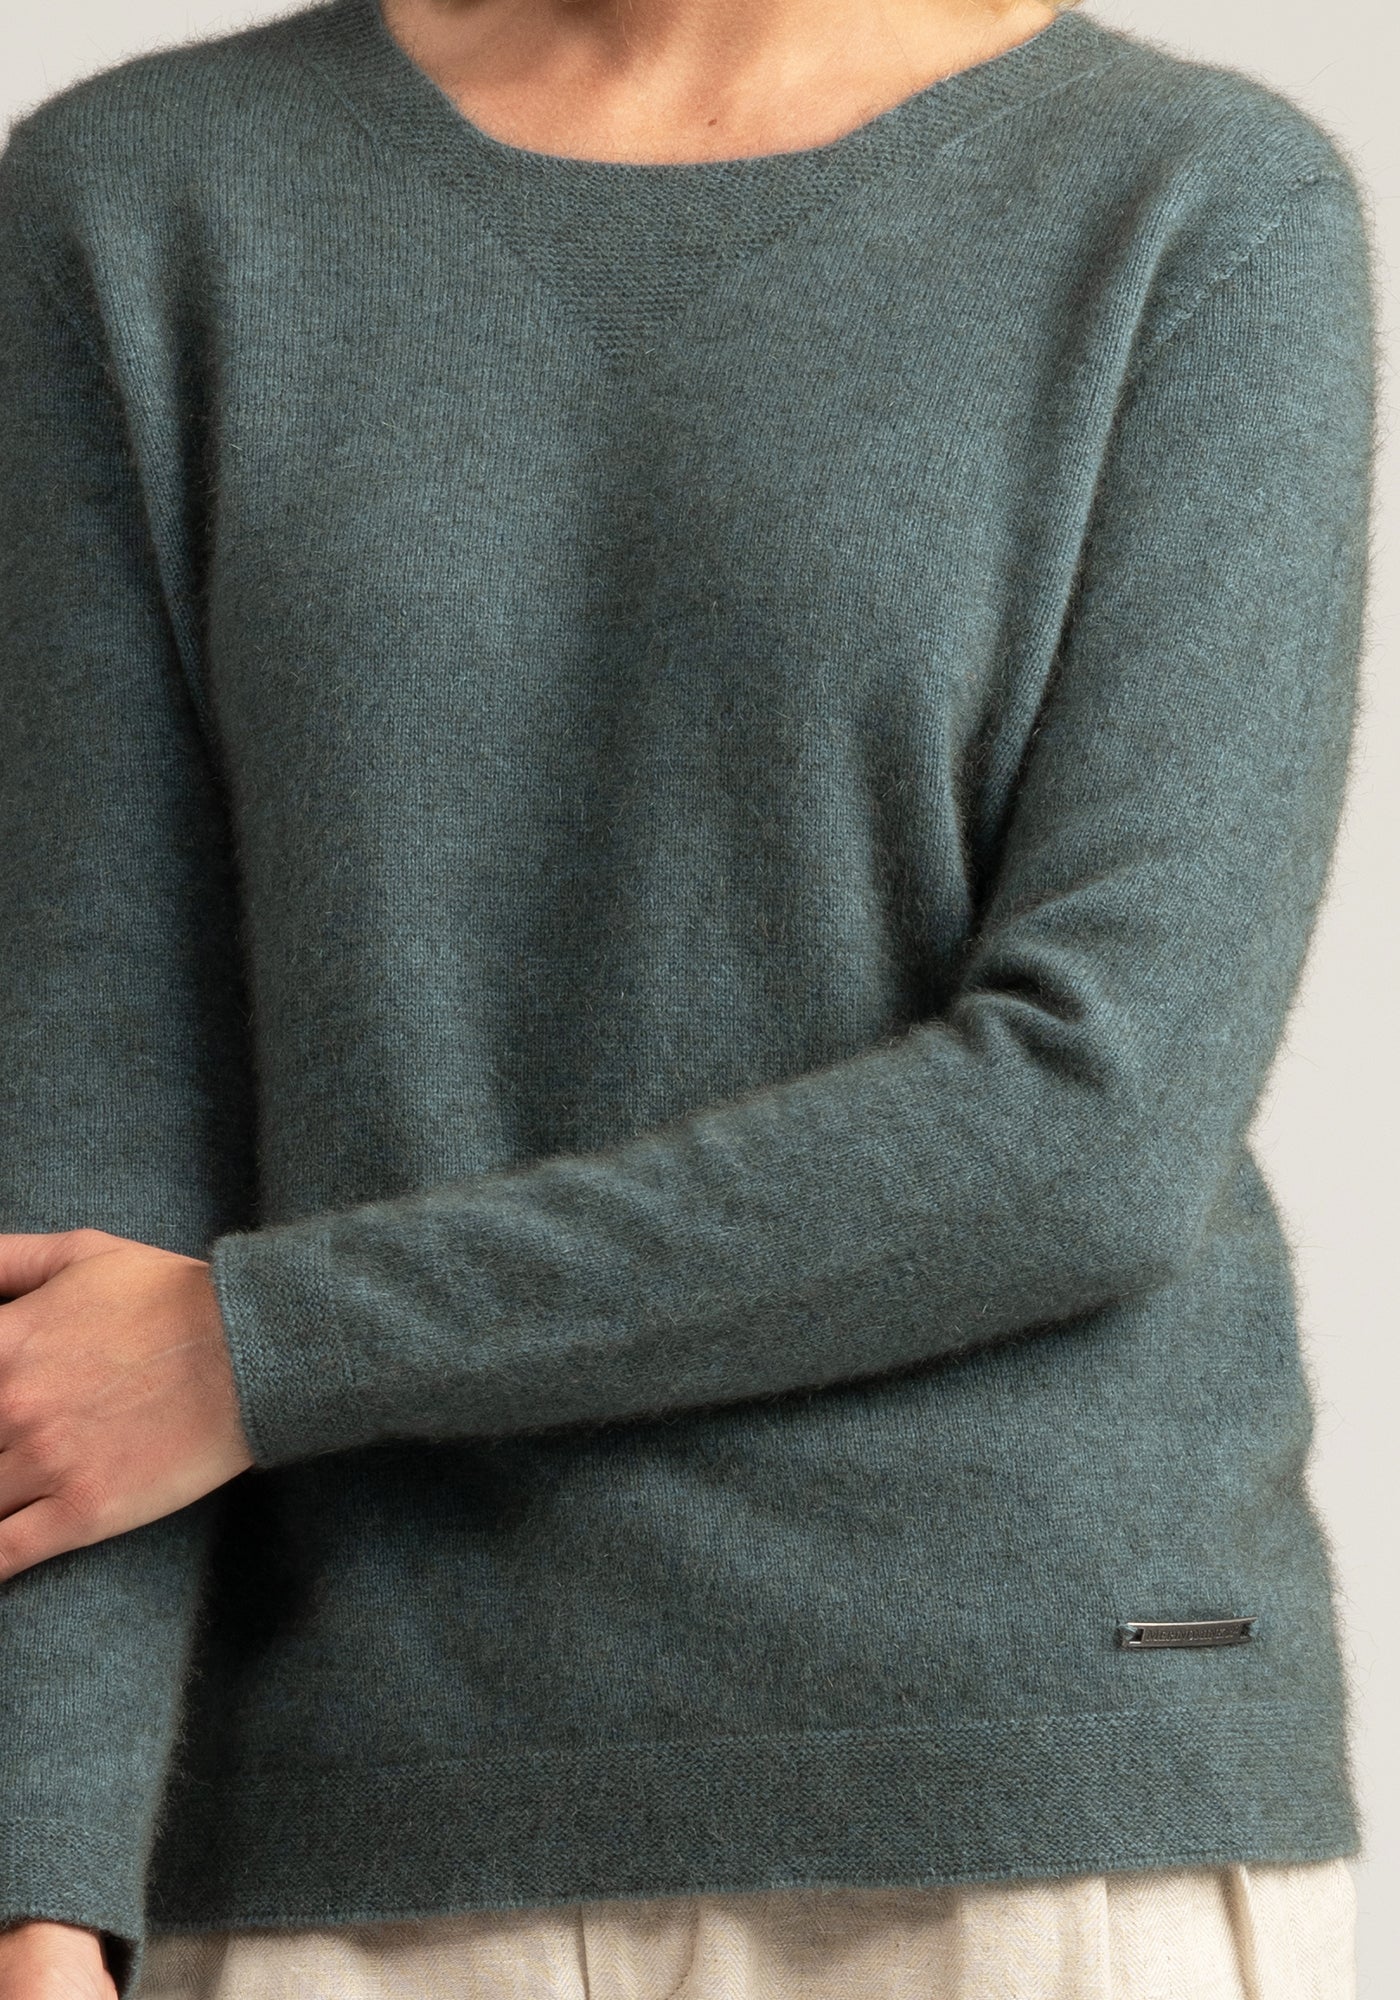 "Discover the perfect grey merino wool sweater for all occasions. Unmatched quality and sophistication await."